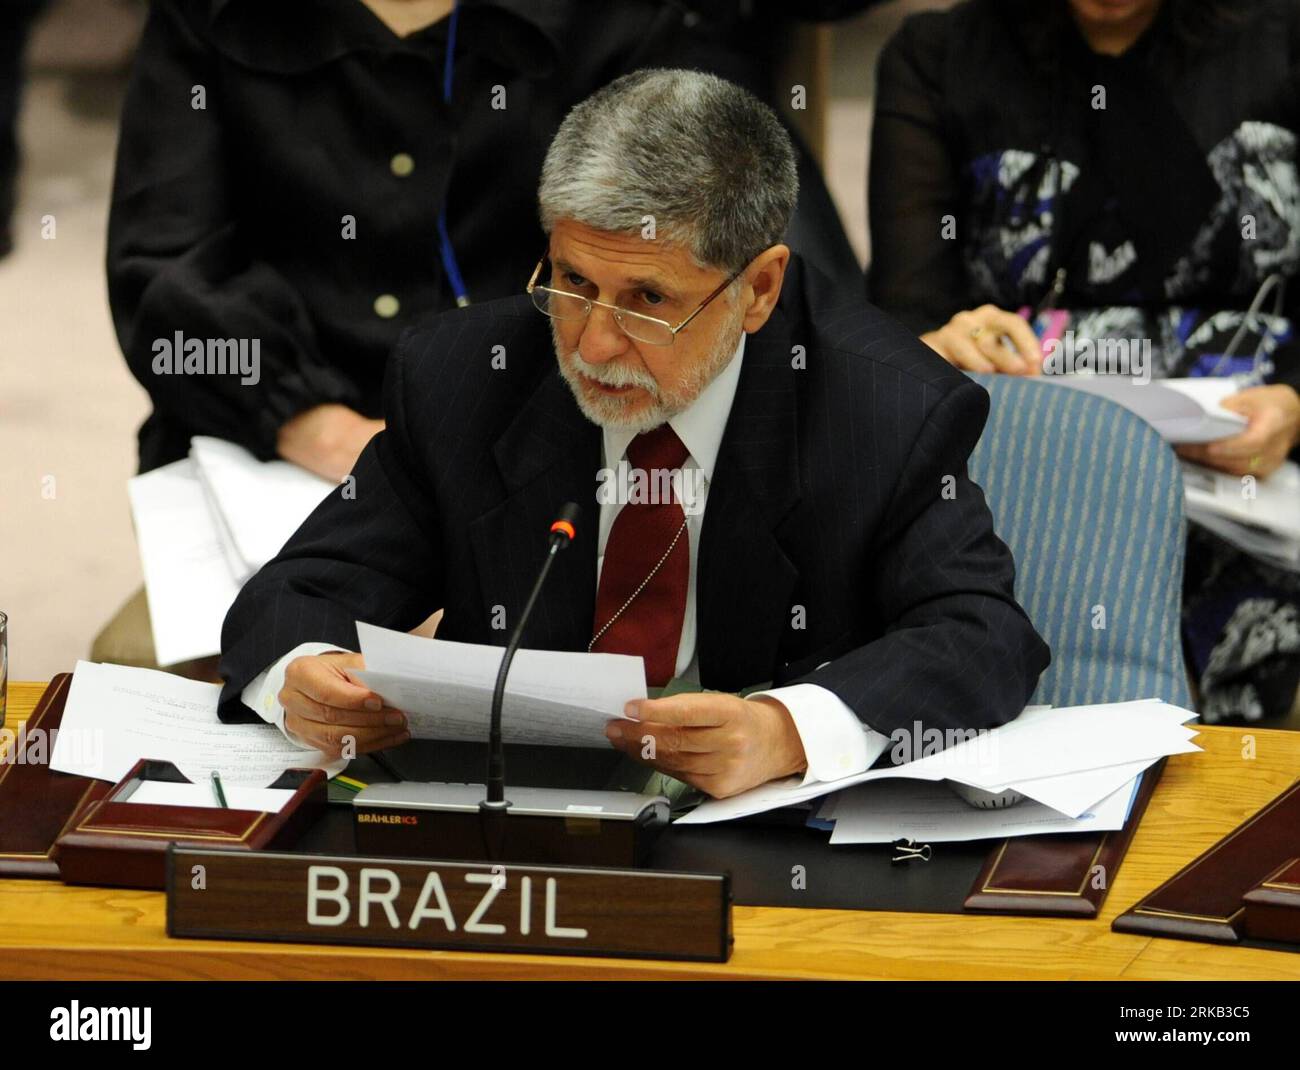 Bildnummer: 54462640  Datum: 23.09.2010  Copyright: imago/Xinhua (100923) -- NEW YORK, Sept. 23, 2010 (Xinhua) -- Brazilian Foreign Minister Celso Luiz Nunes Amorim speaks during the United Nations Security Council summit on the maintenance of international peace and security at the UN headquarters in New York, Sept. 23, 2010. (Xinhua/Shen Hong) (zw) UN-SECURITY COUNCIL-SUMMIT PUBLICATIONxNOTxINxCHN People Politik UNO Vollversammlung kbdig xmk 2010 quer premiumd xint     Bildnummer 54462640 Date 23 09 2010 Copyright Imago XINHUA  New York Sept 23 2010 XINHUA Brazilian Foreign Ministers Celso L Stock Photo